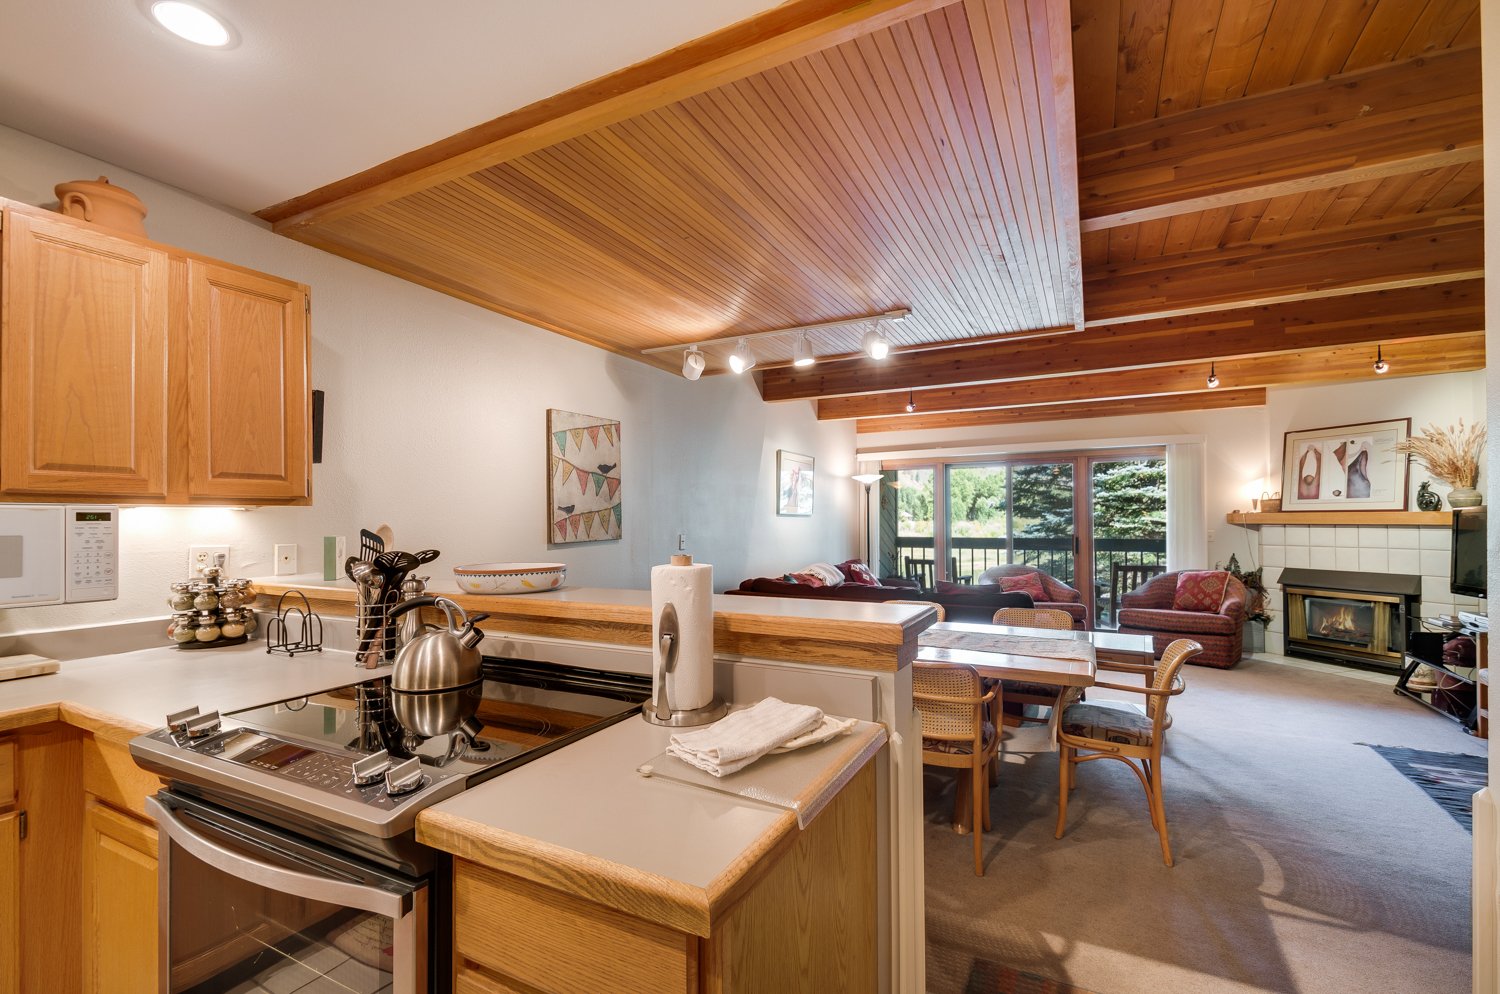 Kitchen to living area view with wood paneling and ceiling